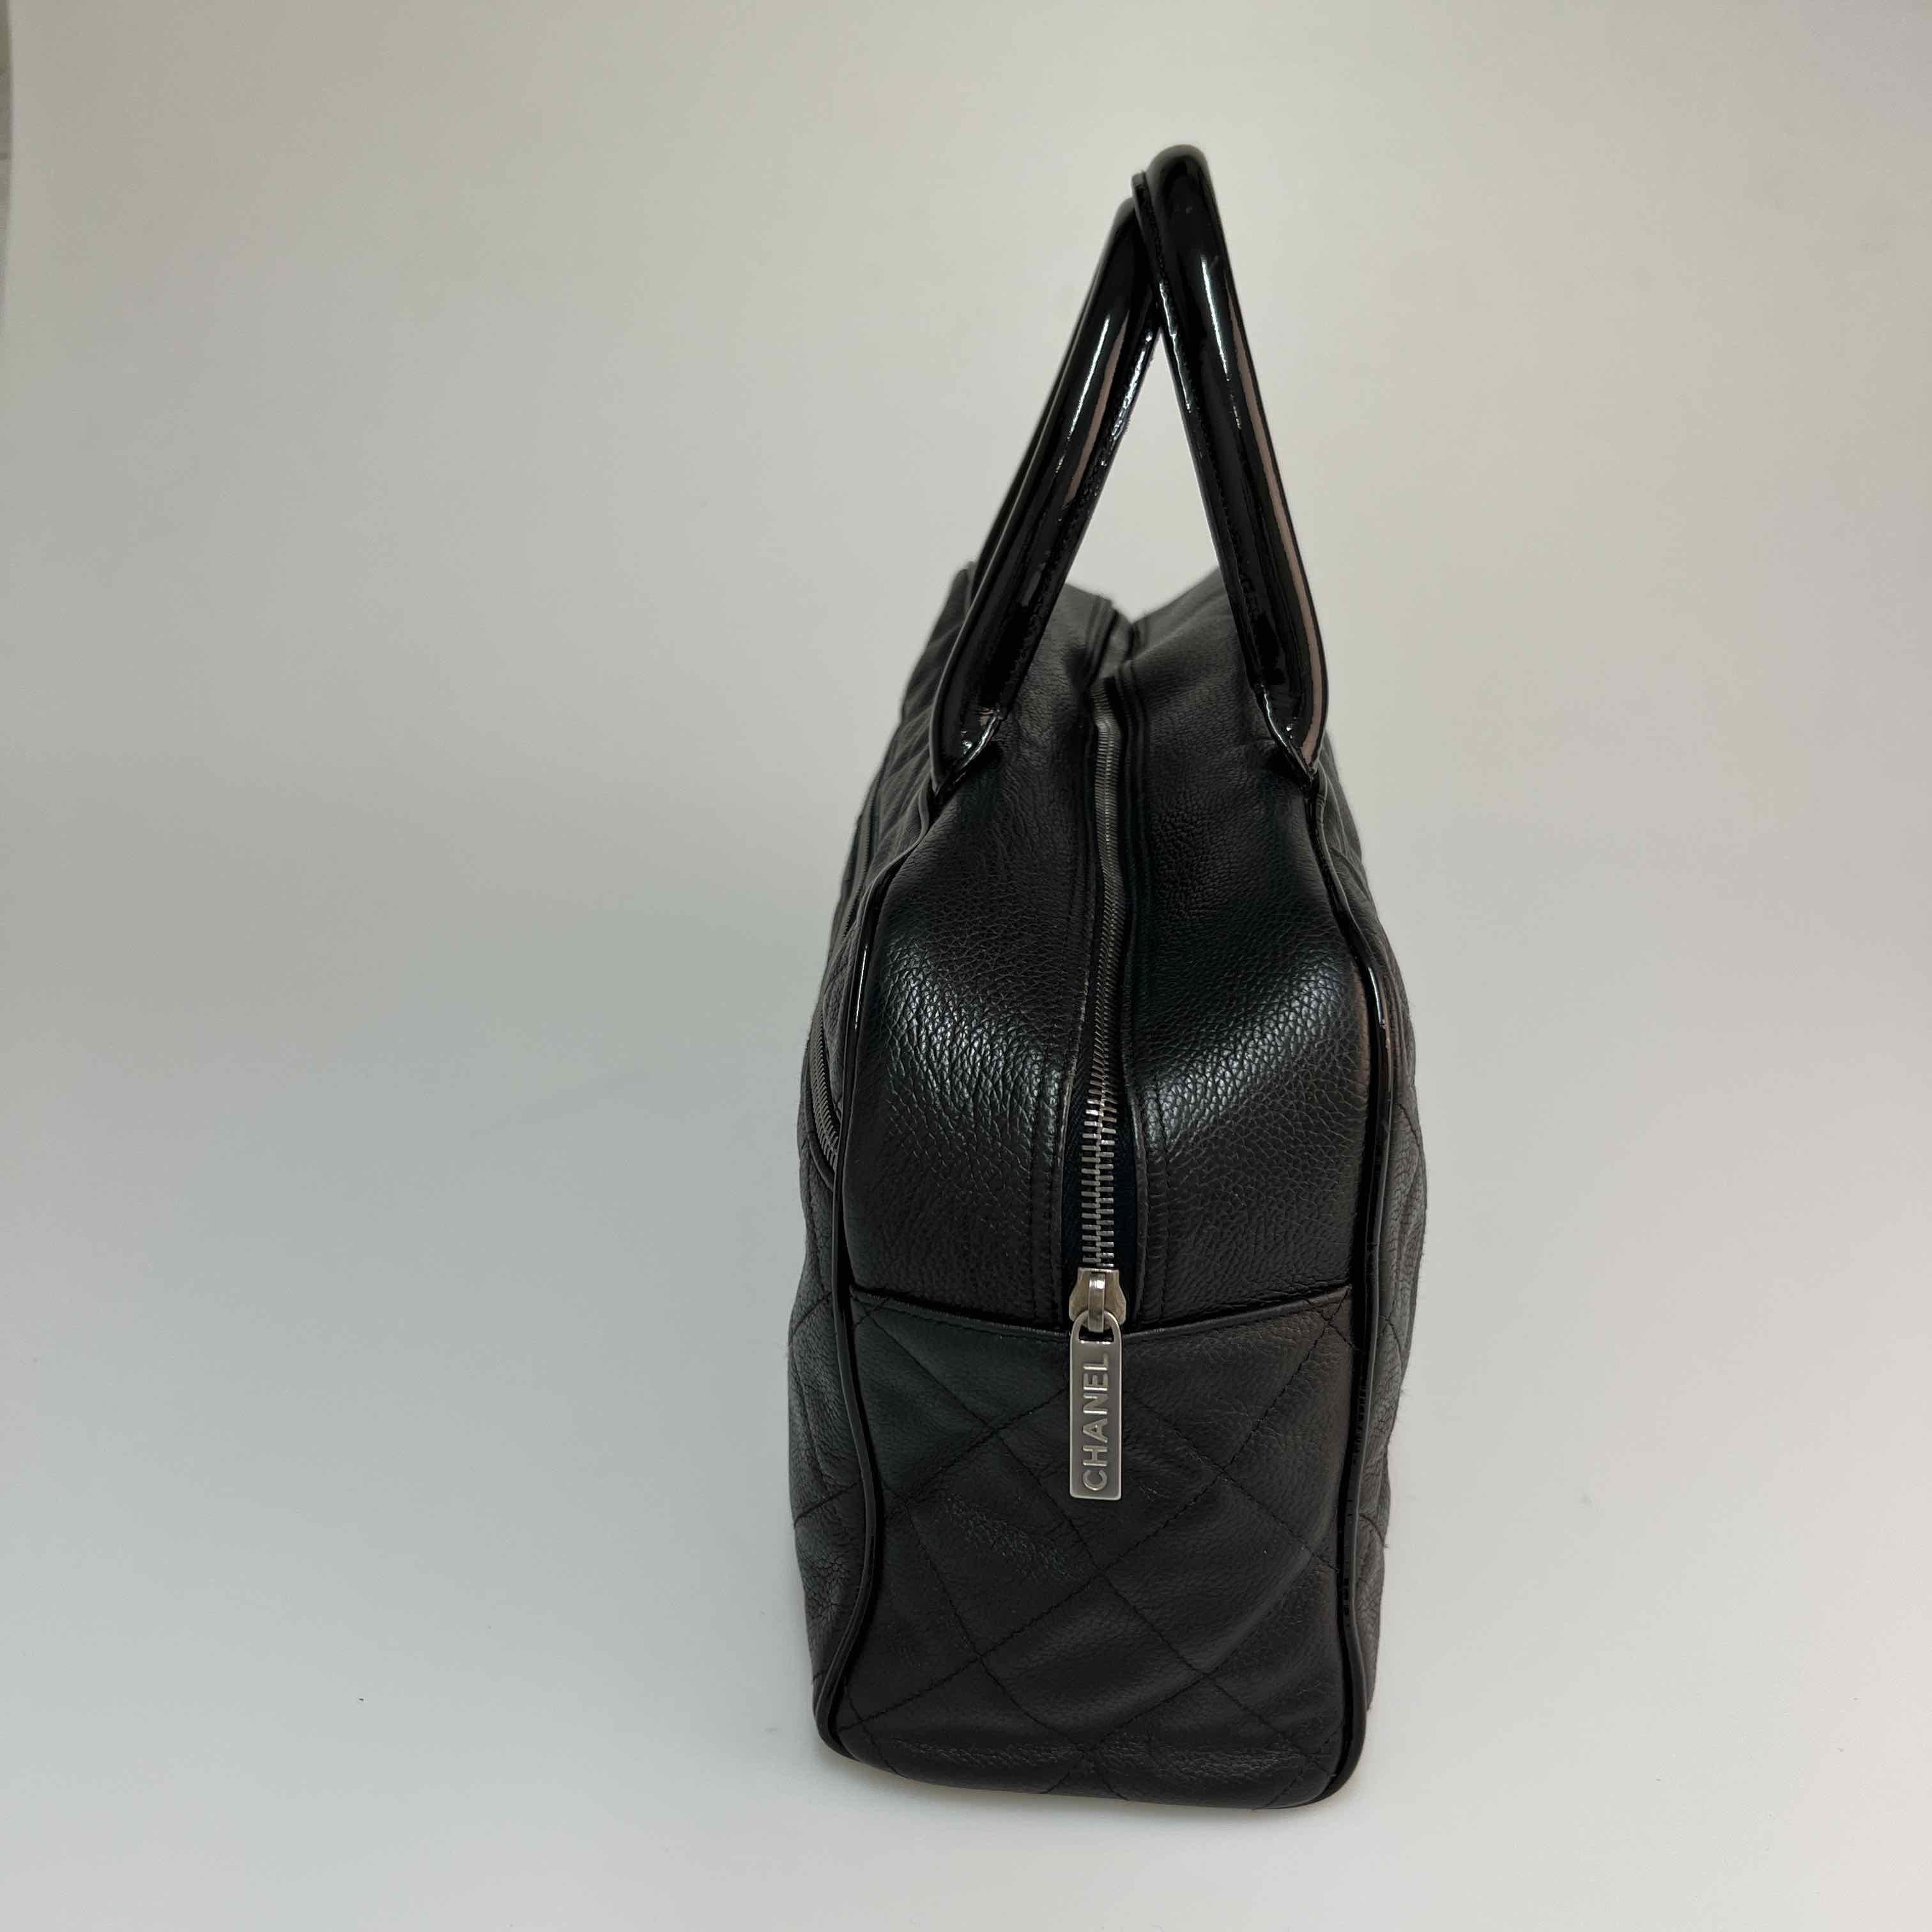 Women's or Men's Vintage CHANEL Bowling Bag in Black Grained Leather.